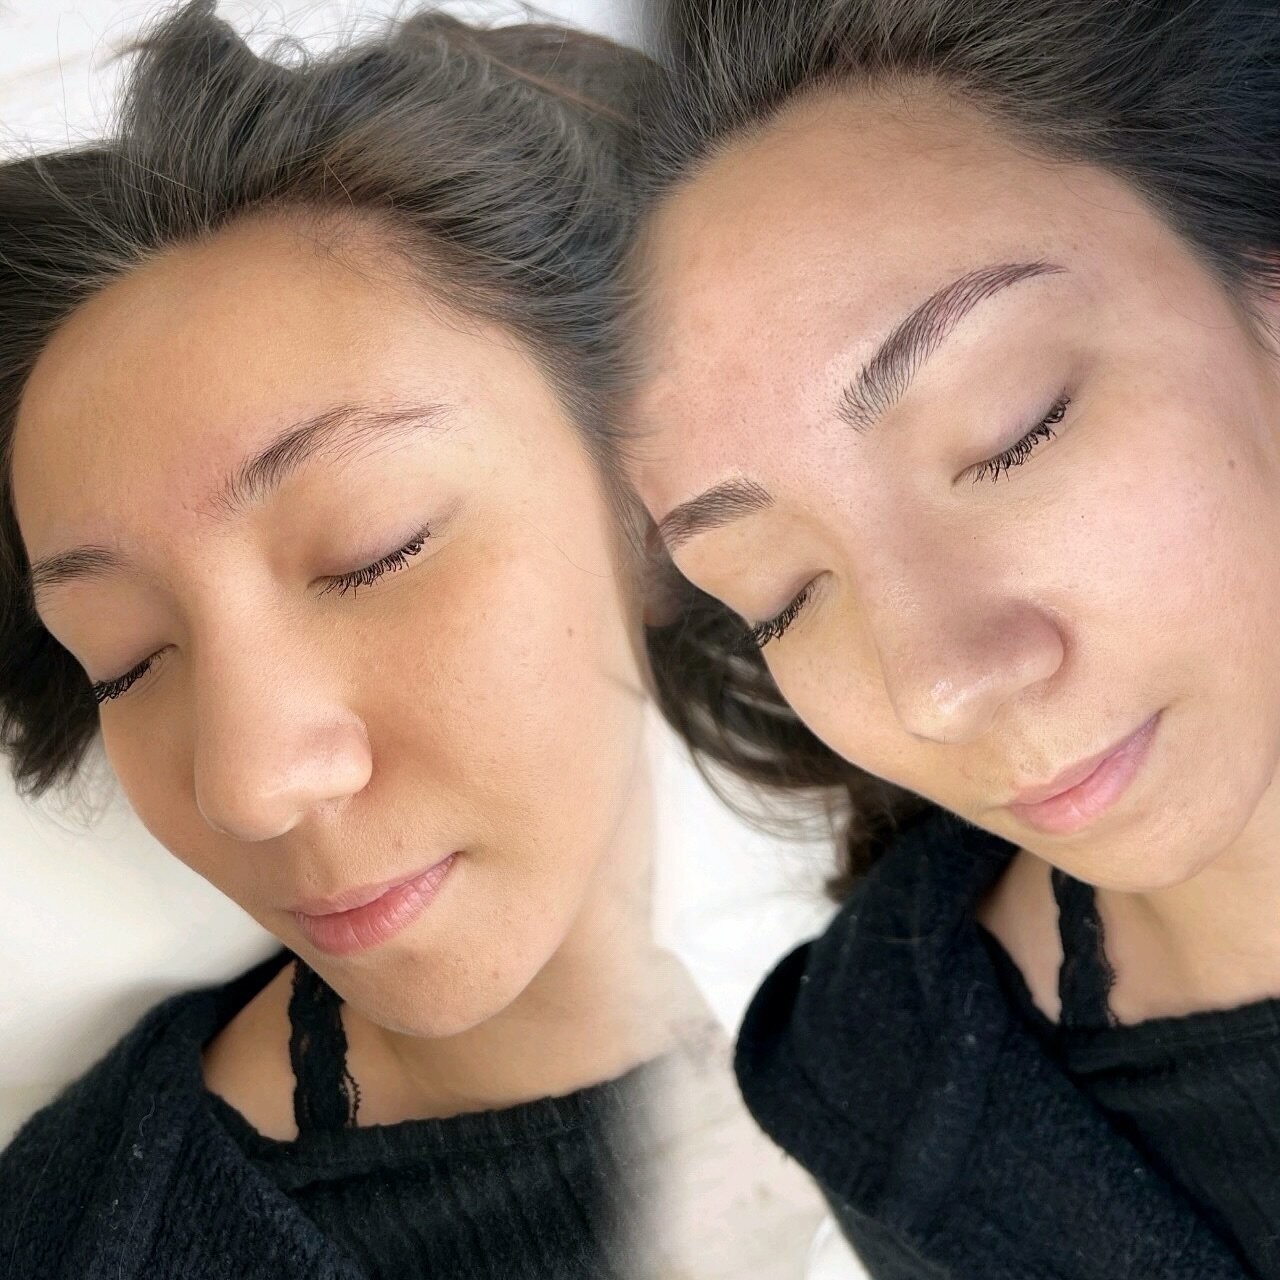 Microblading 🪄 to fill in a big missing patch of hair and restructure her shape. 🤩 

How natural are these results?!

#microblading #microbladingeyebrows #microbladedbrows #microbladingartist #microbladingseattle #eyebrowtattoo #seattlebrows #micro